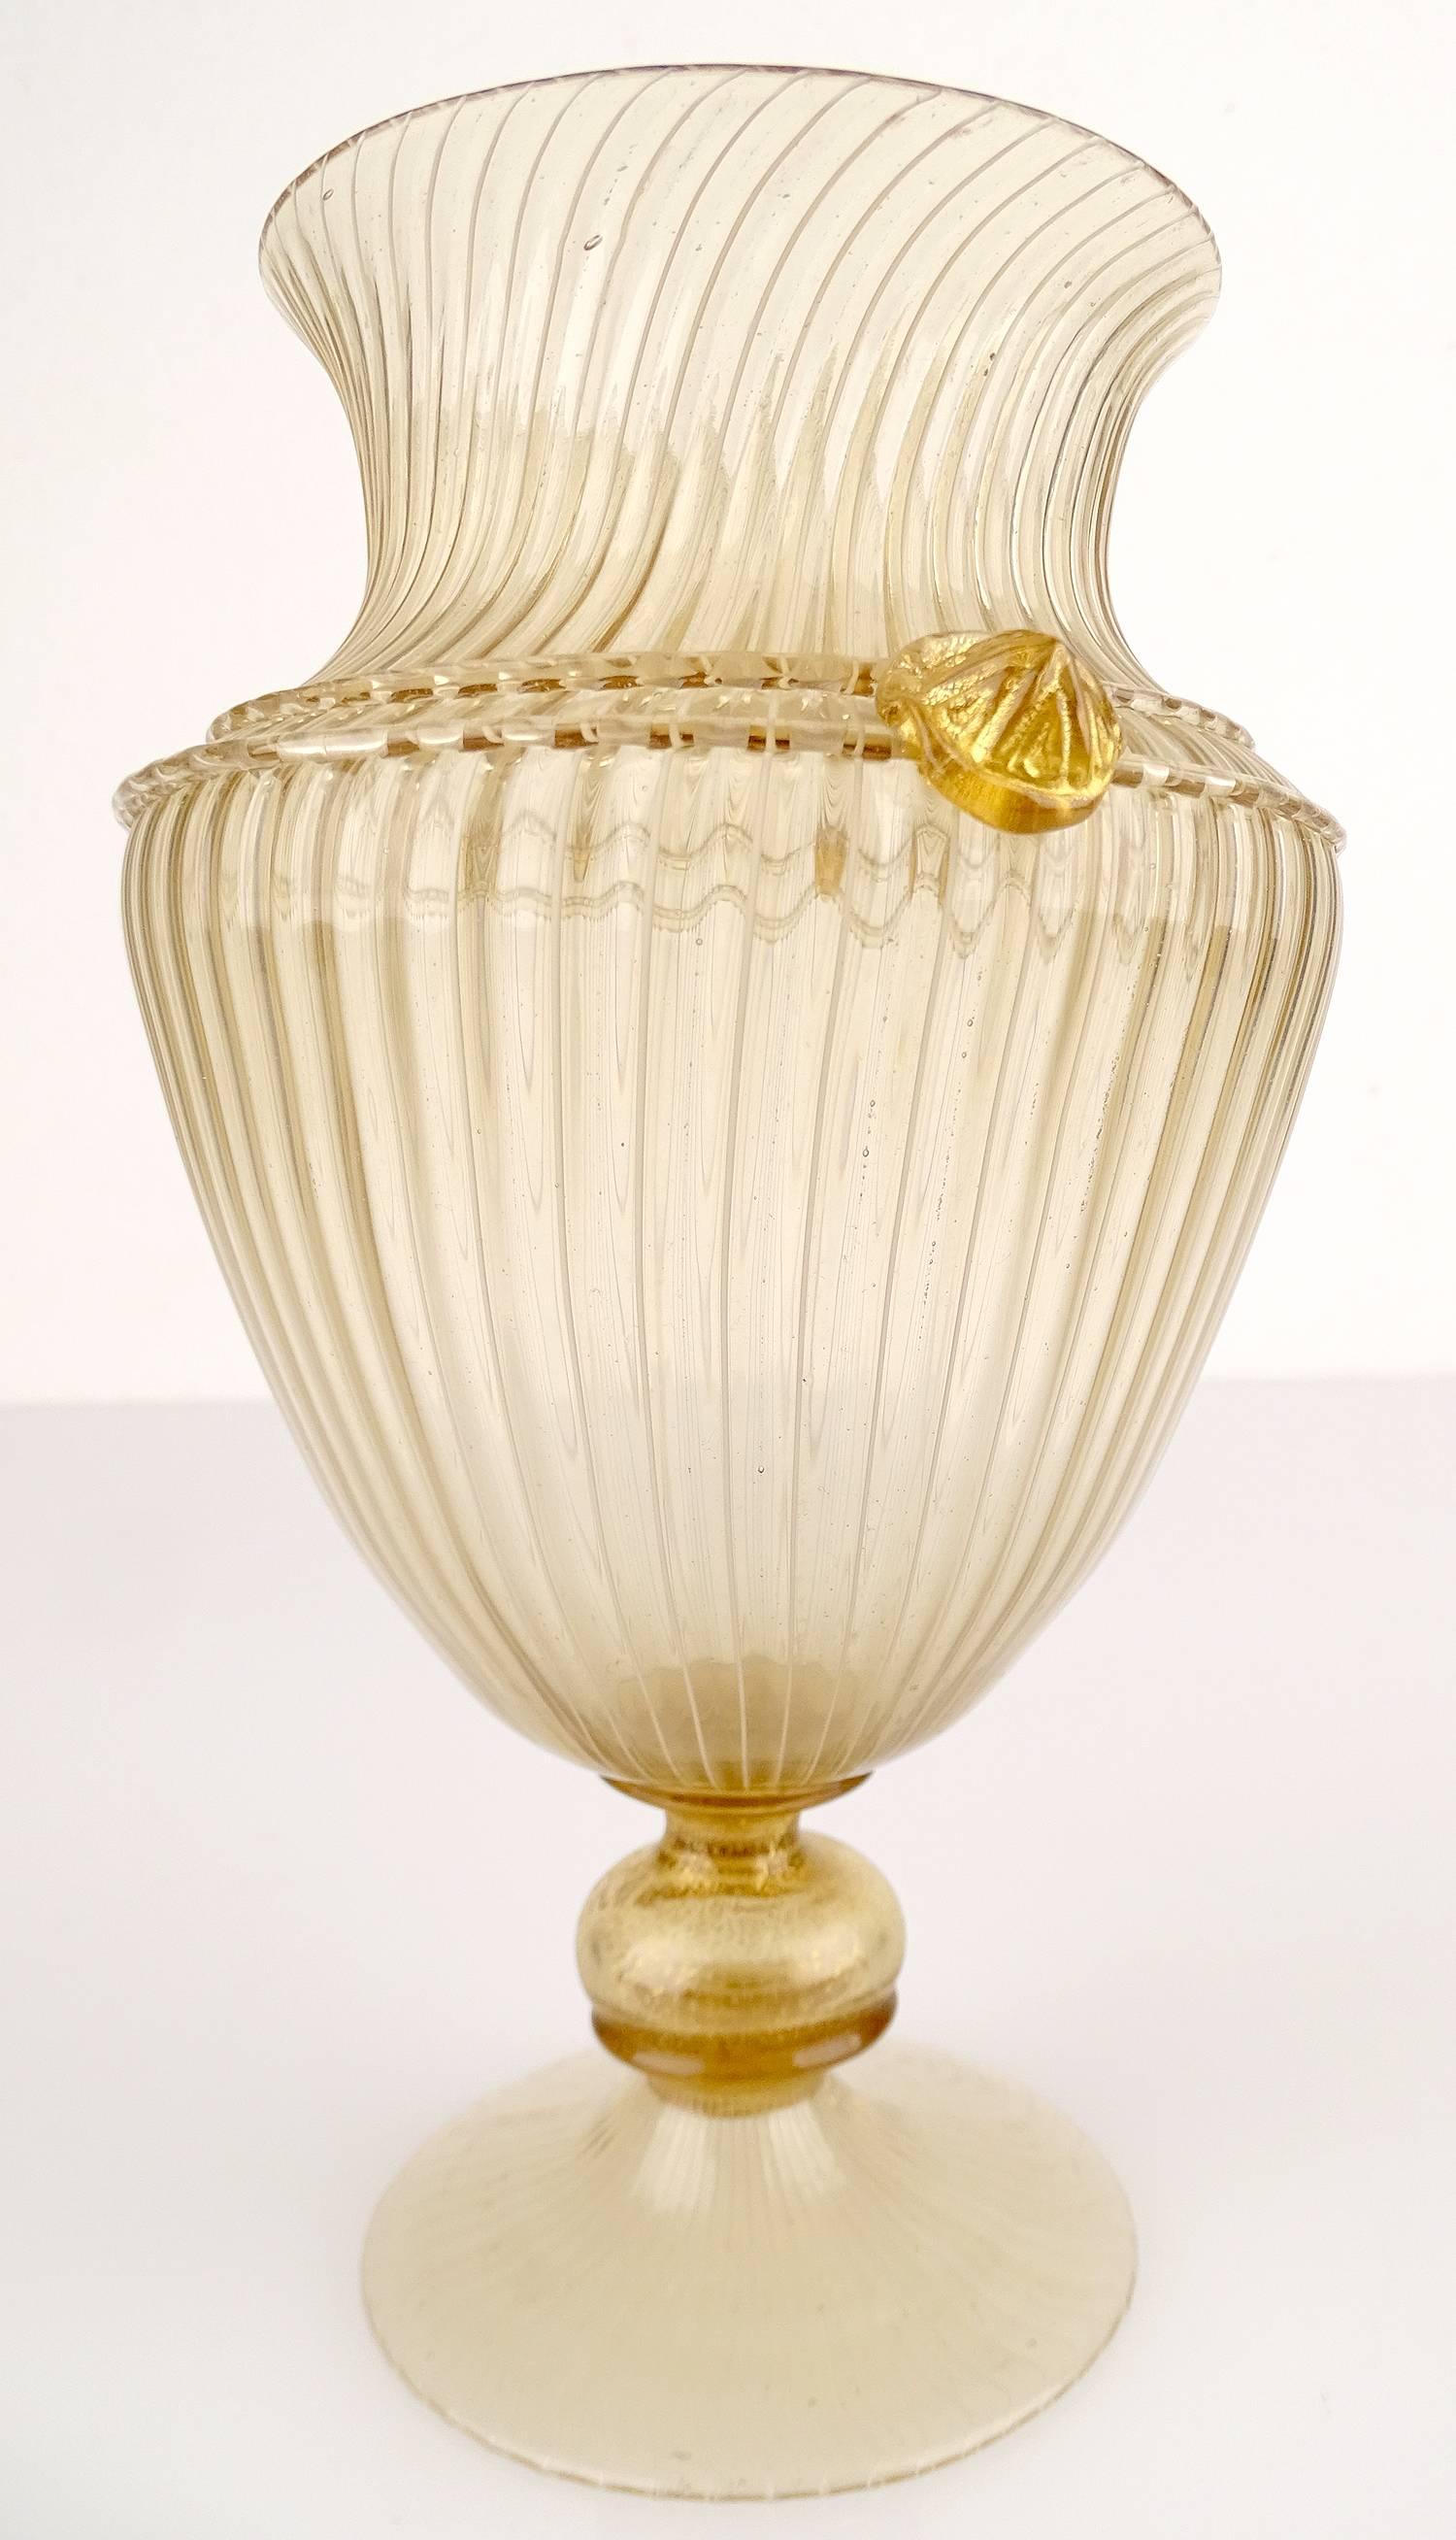 Mid-Century barovier tosso Murano glass and gold powder vase, early 1950s amphora design inspired from the roman antique, Amphora shape with gold sprinkled cabochons and base, very delicate Italian masterpiece

.